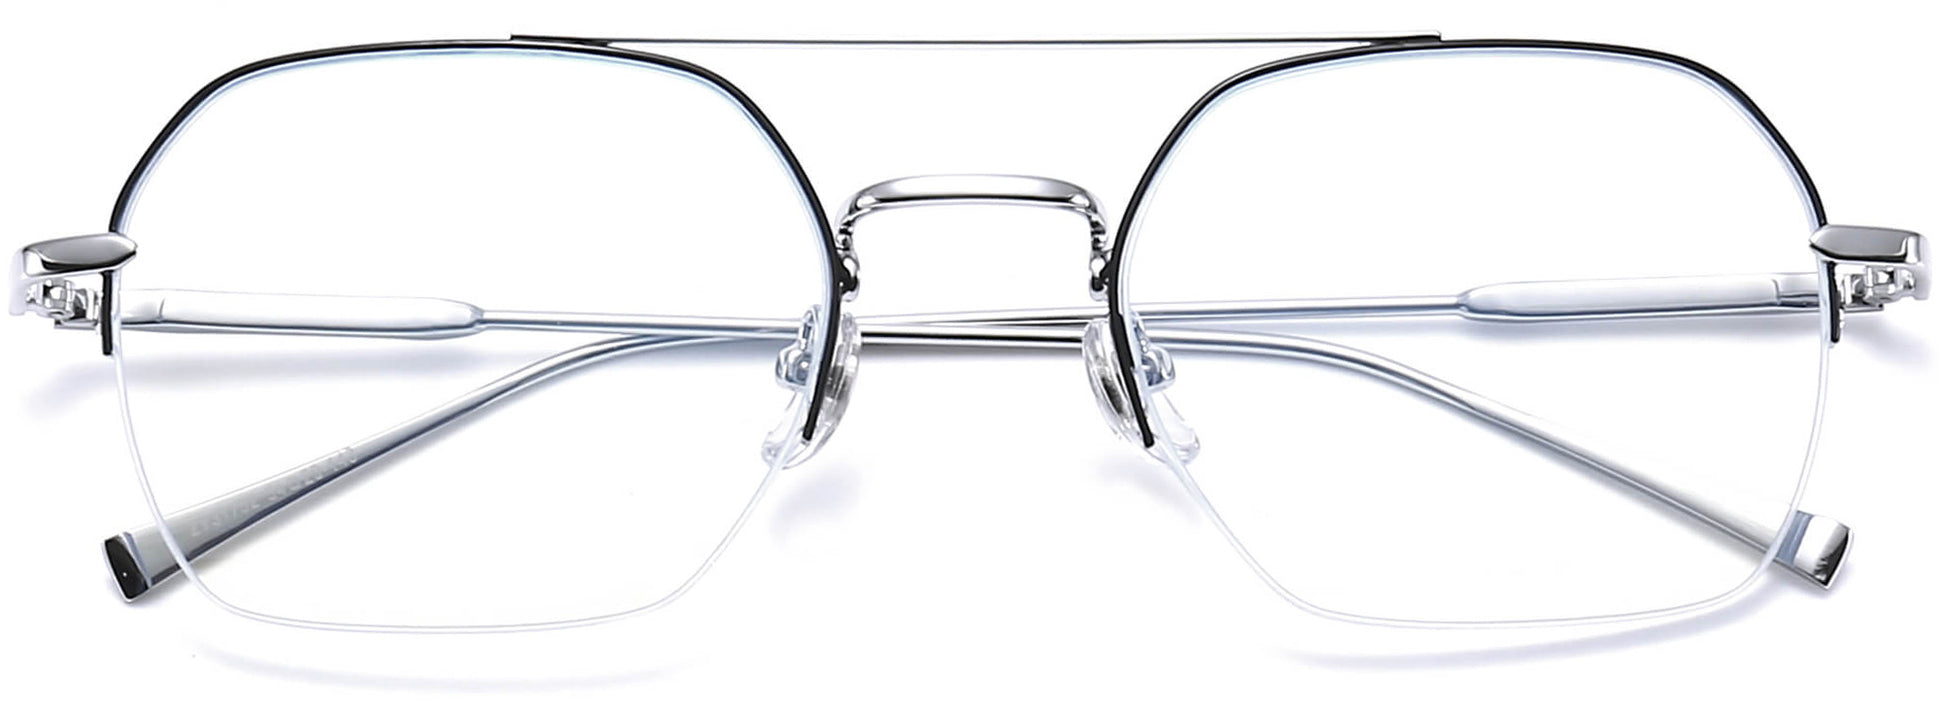 Jalen Square Black Eyeglasses from ANRRI, closed view